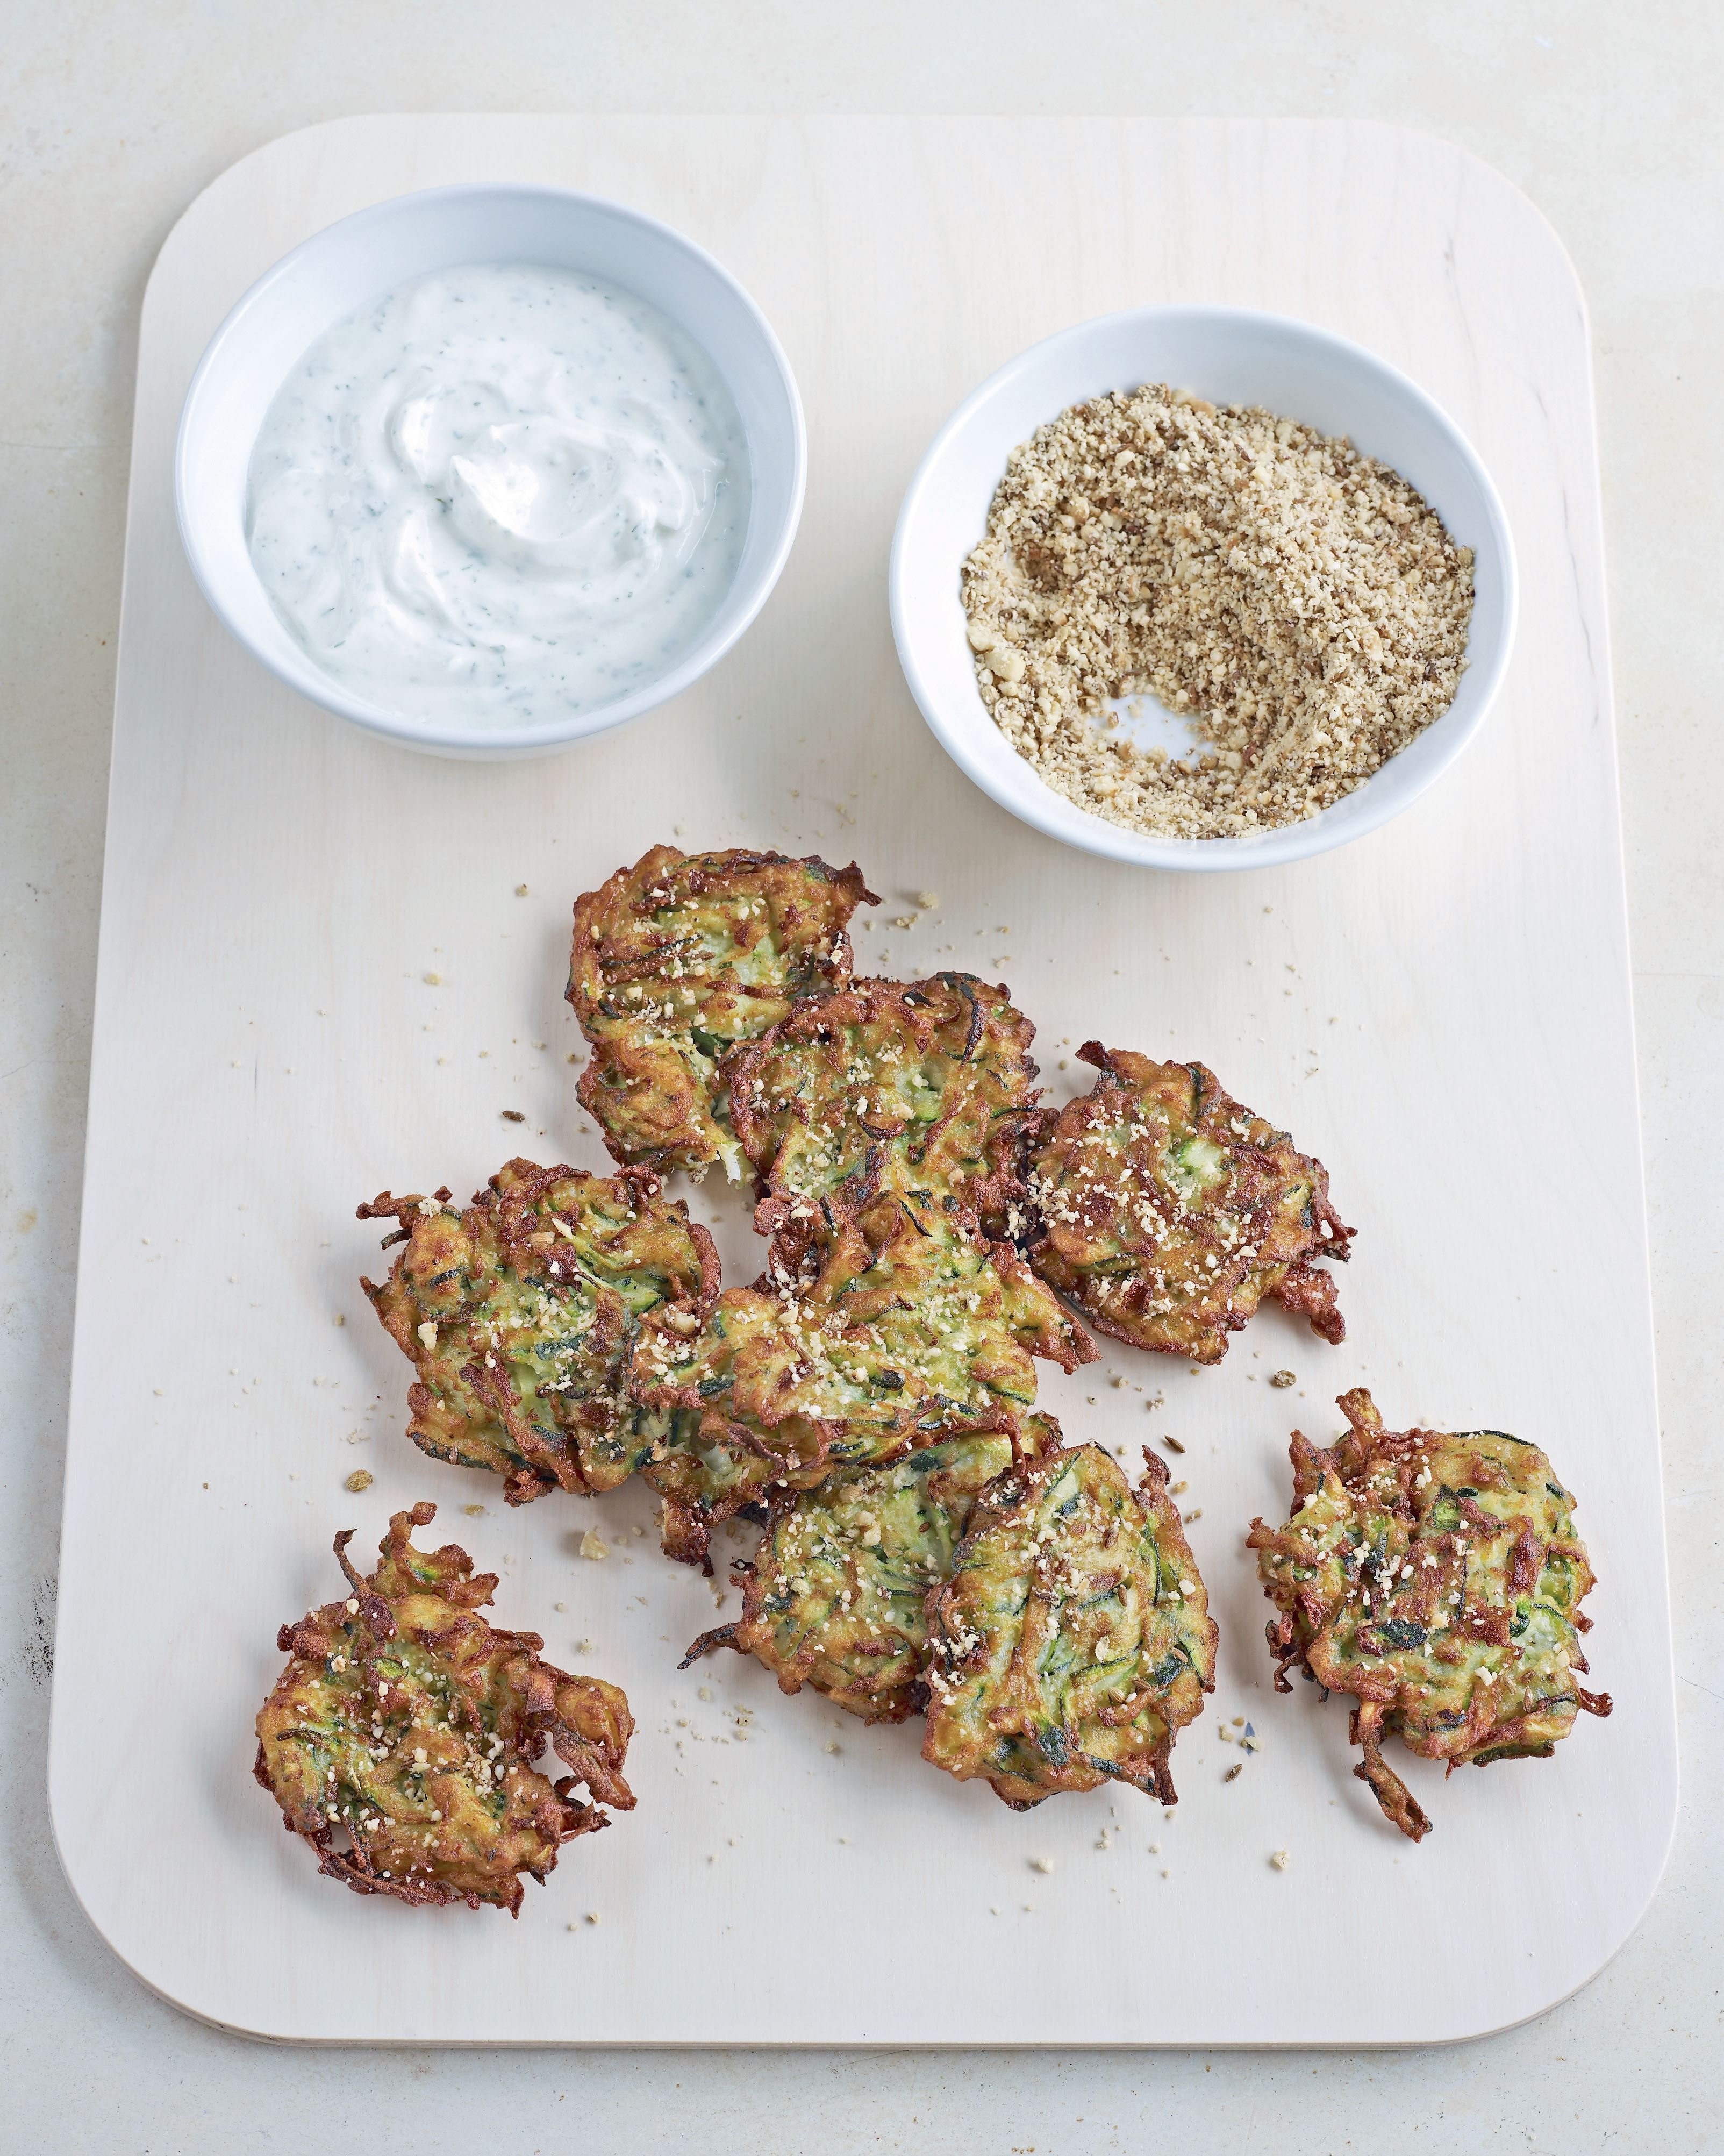 Courgette fritters with dukkah